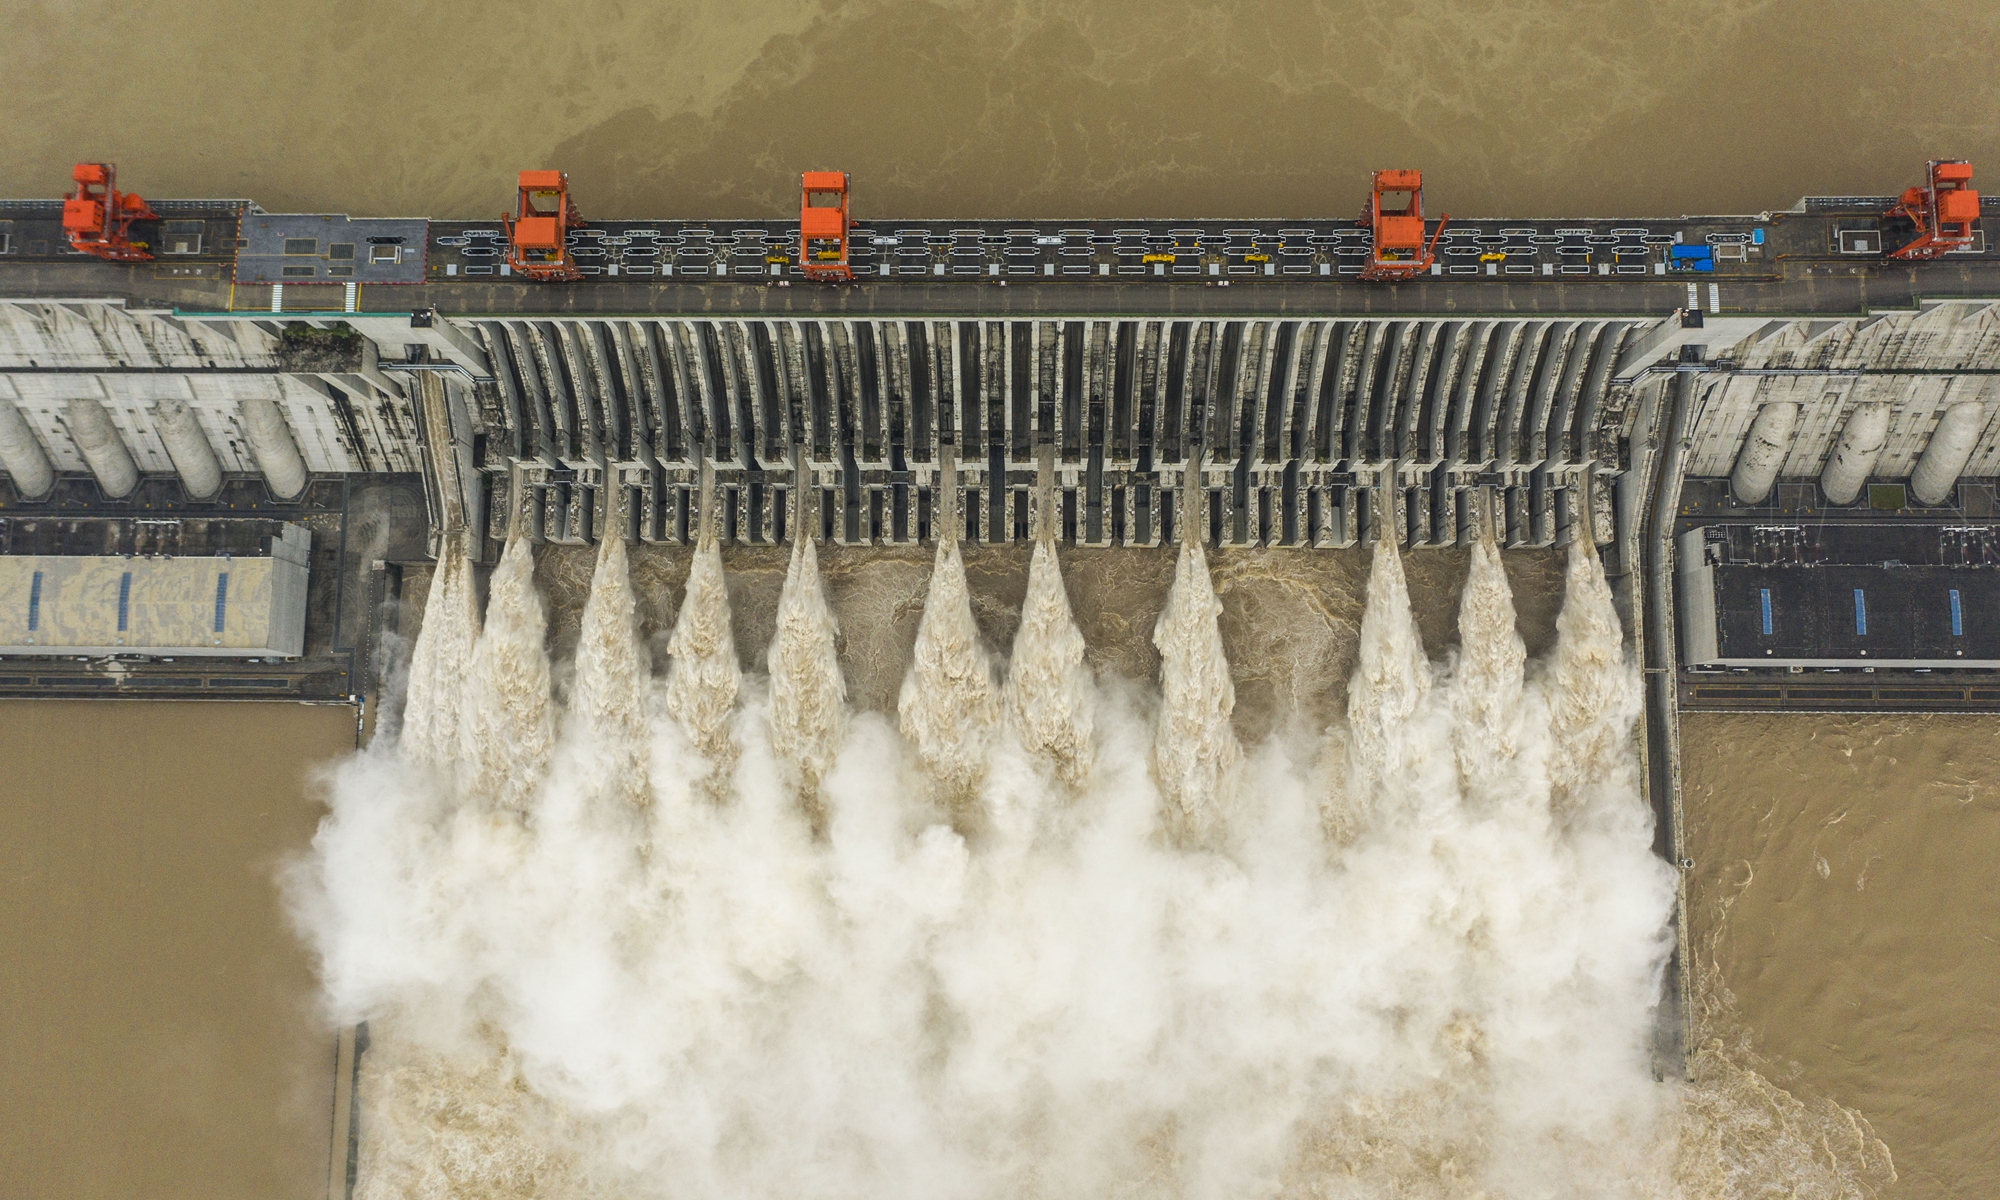 The Three Gorges Dam in Yichang, Central China's Hubei Province, opens 11 release valves to discharge water on August 20, 2020, to cope with the biggest flood since the construction of the dam. Photo: VCG